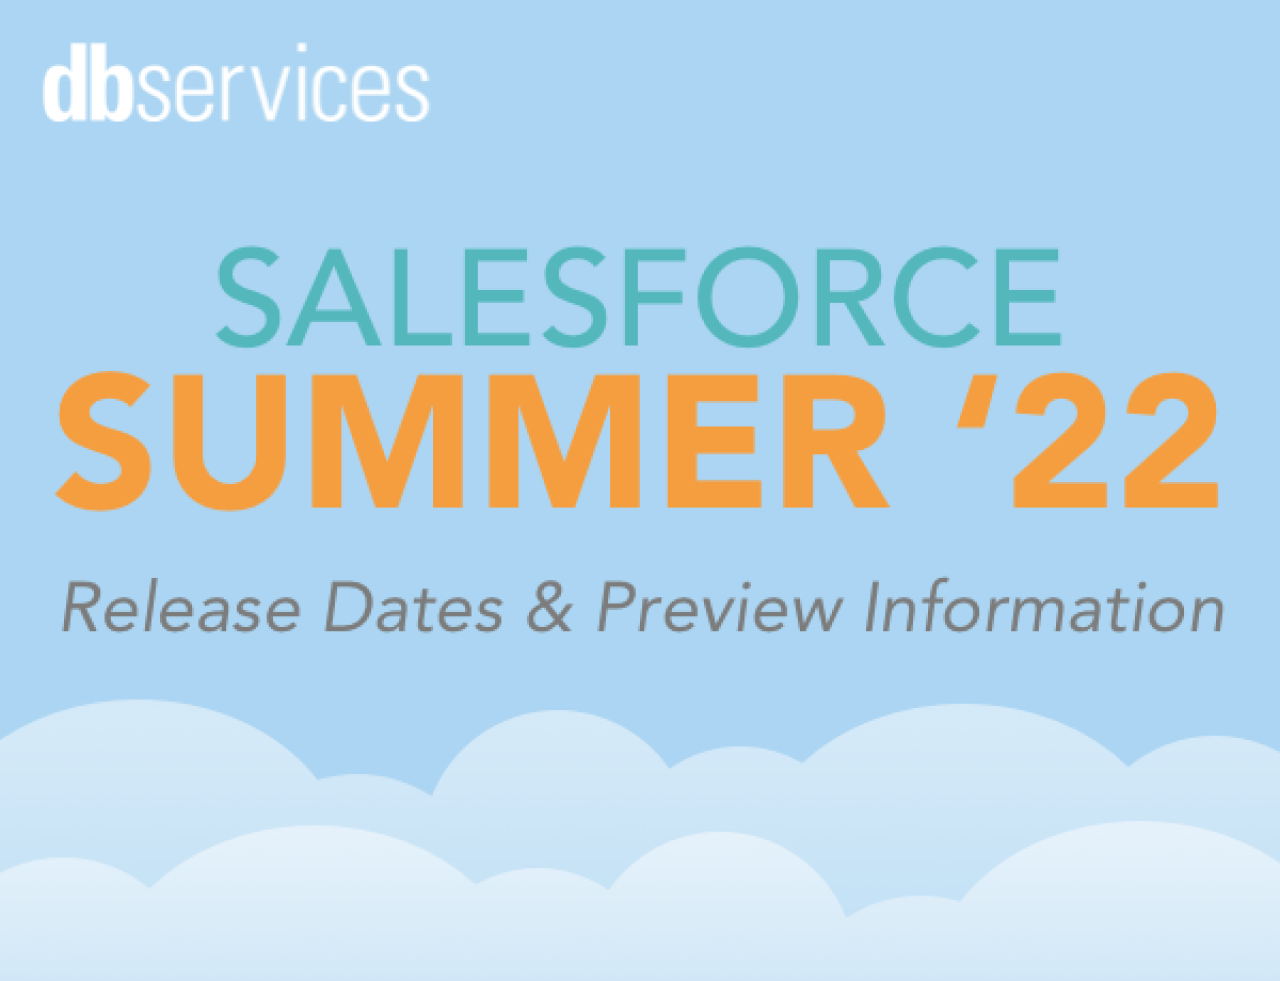 salesforce summer 22 release dates and preview information.